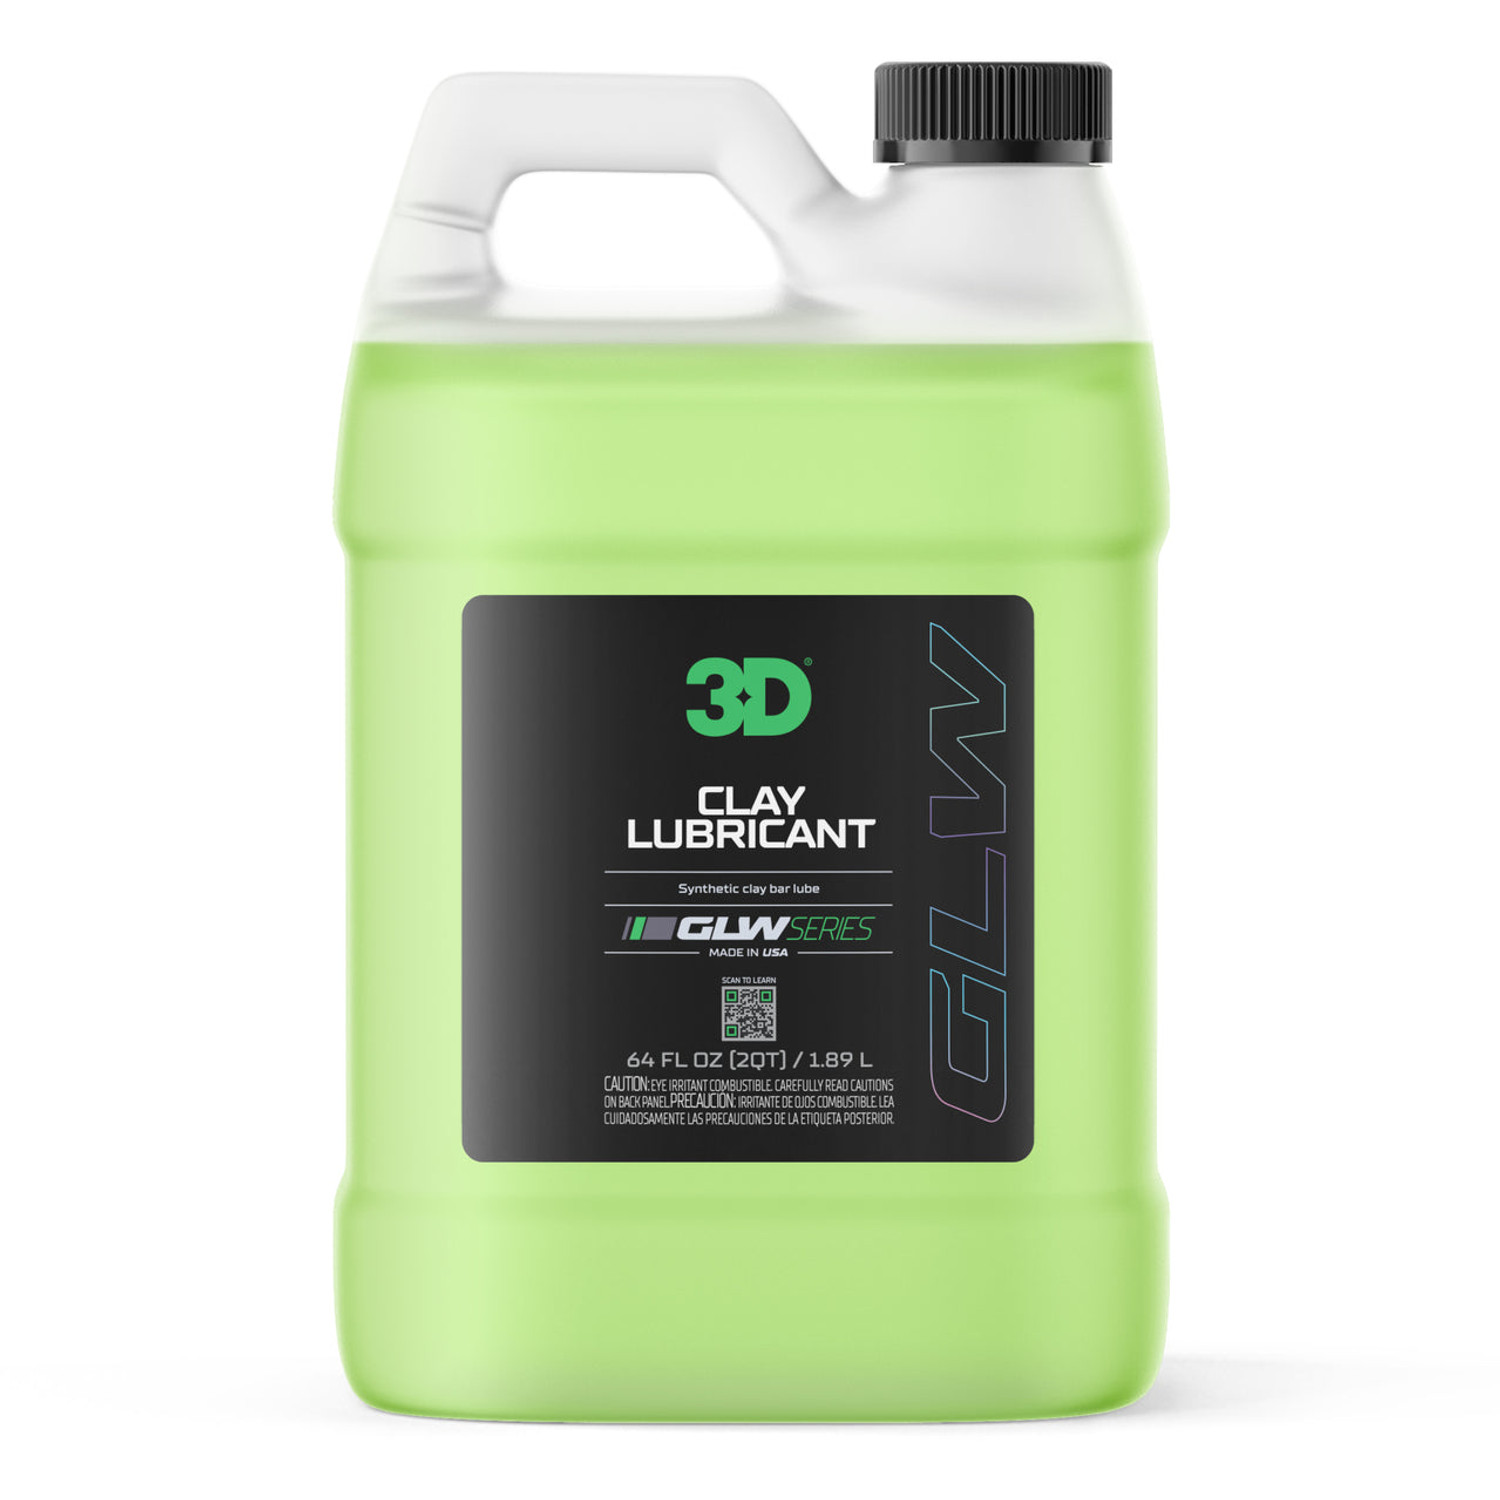 3D GLW Series Clay Lubricant 64oz | Synthetic Clay Bar Lube